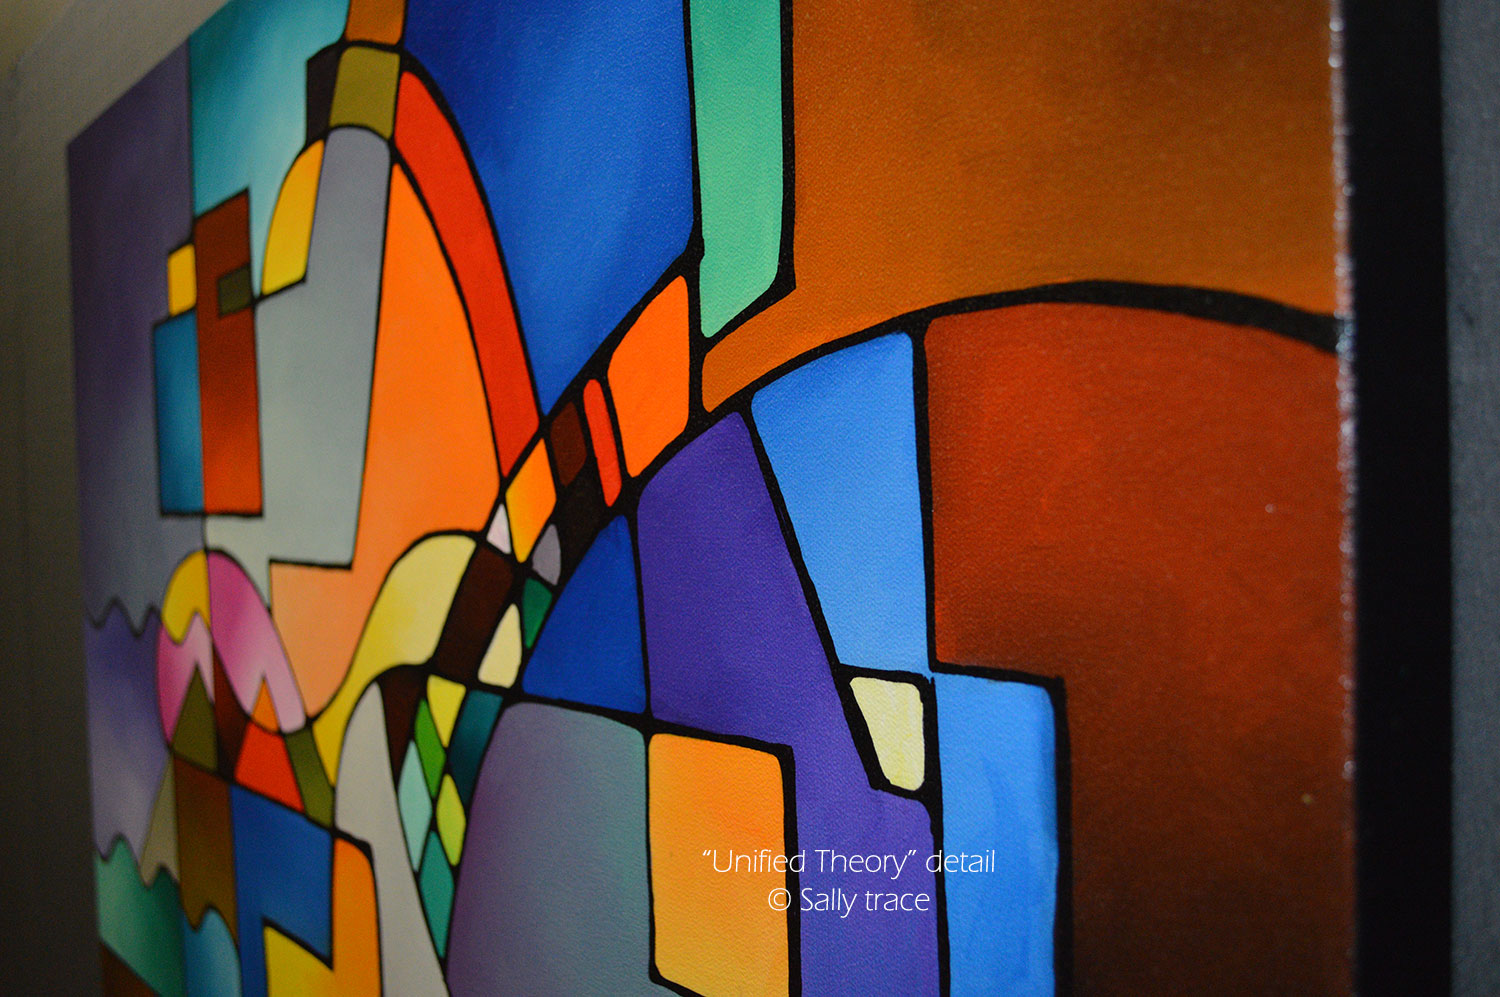 Unified Theory, original abstract art for sale, contemporary modern geometric painting by Sally Trace, detail view